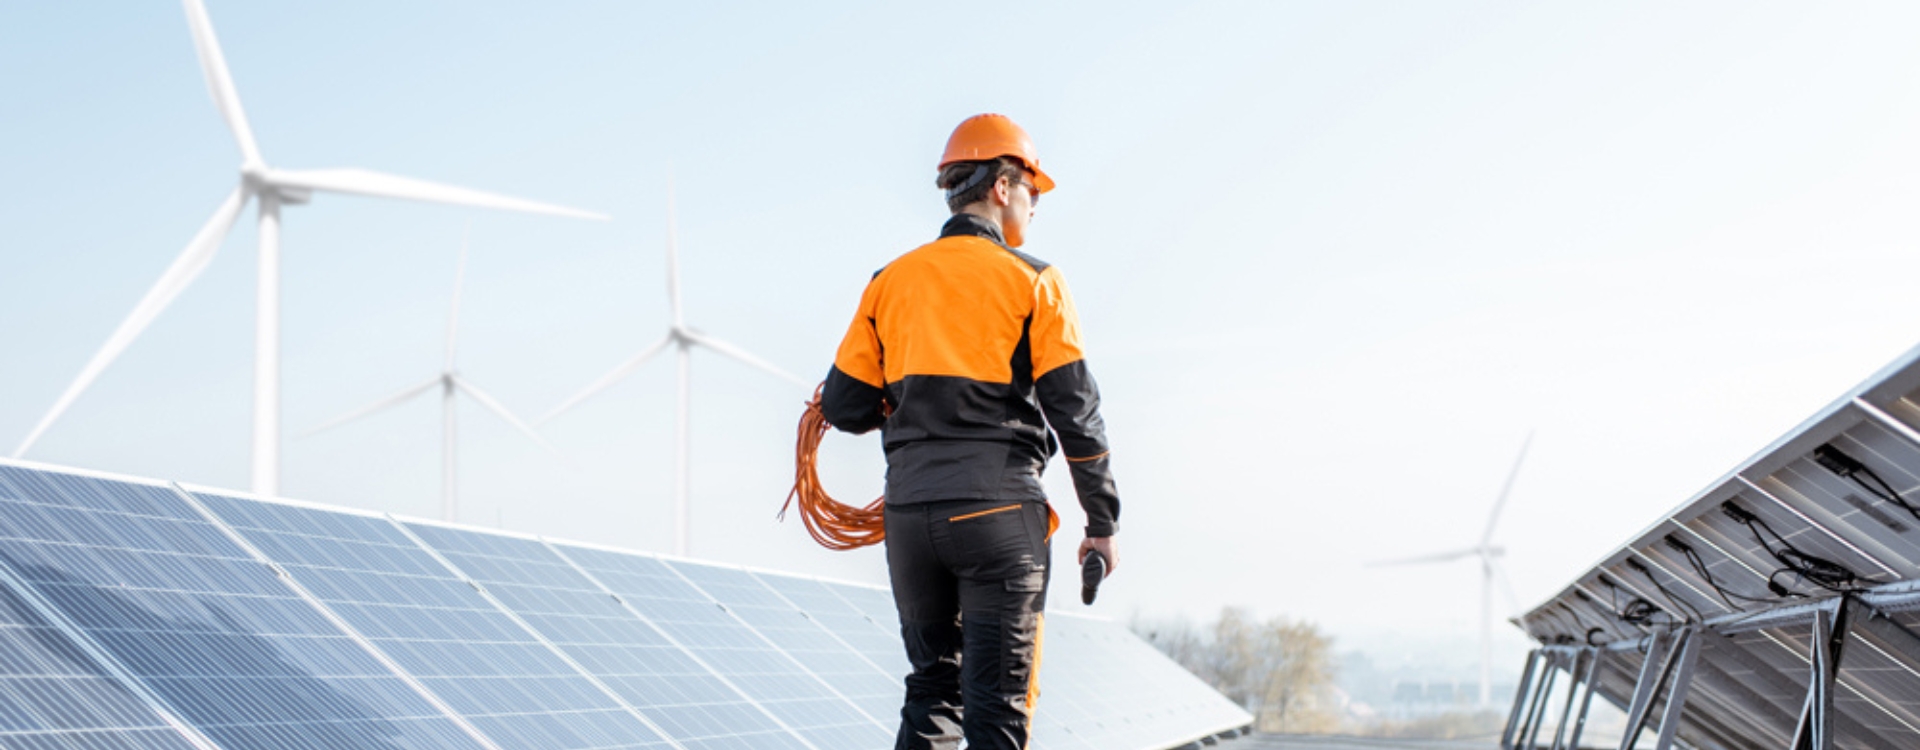 Man in orange hard hat walking past rows of solar panels with wind turbine in background